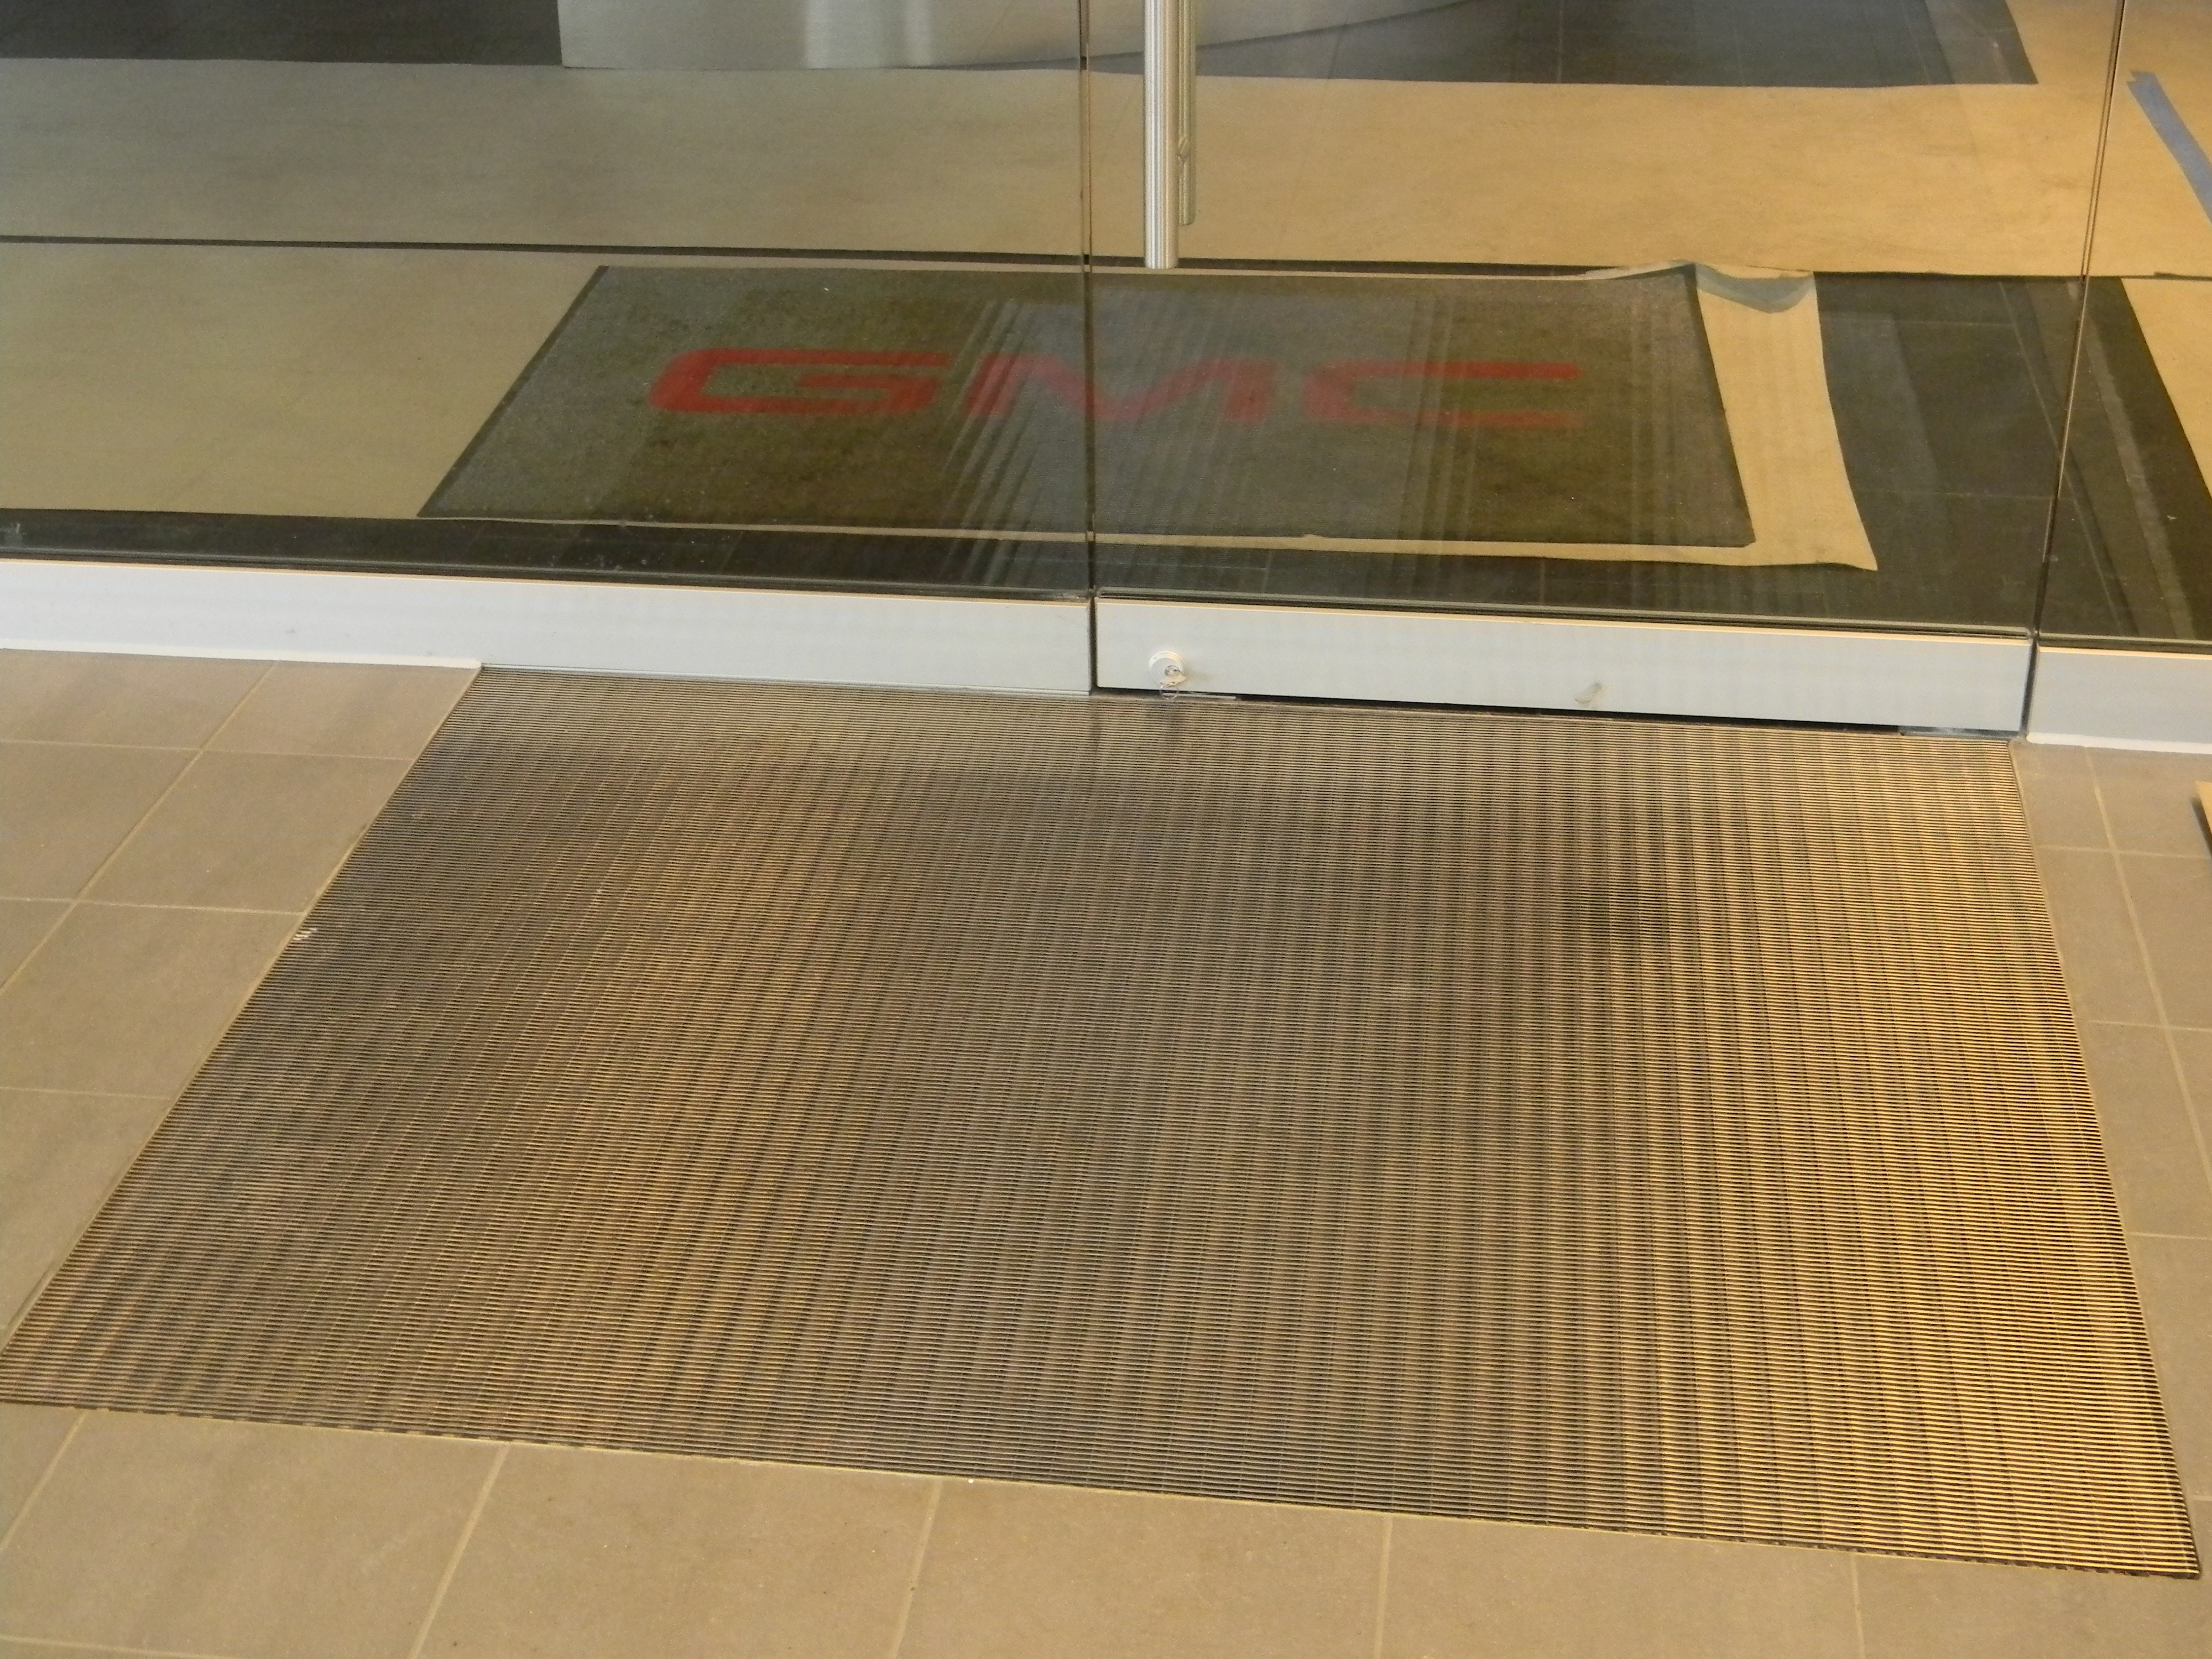 Klost Entrance Mats And Floor Grates